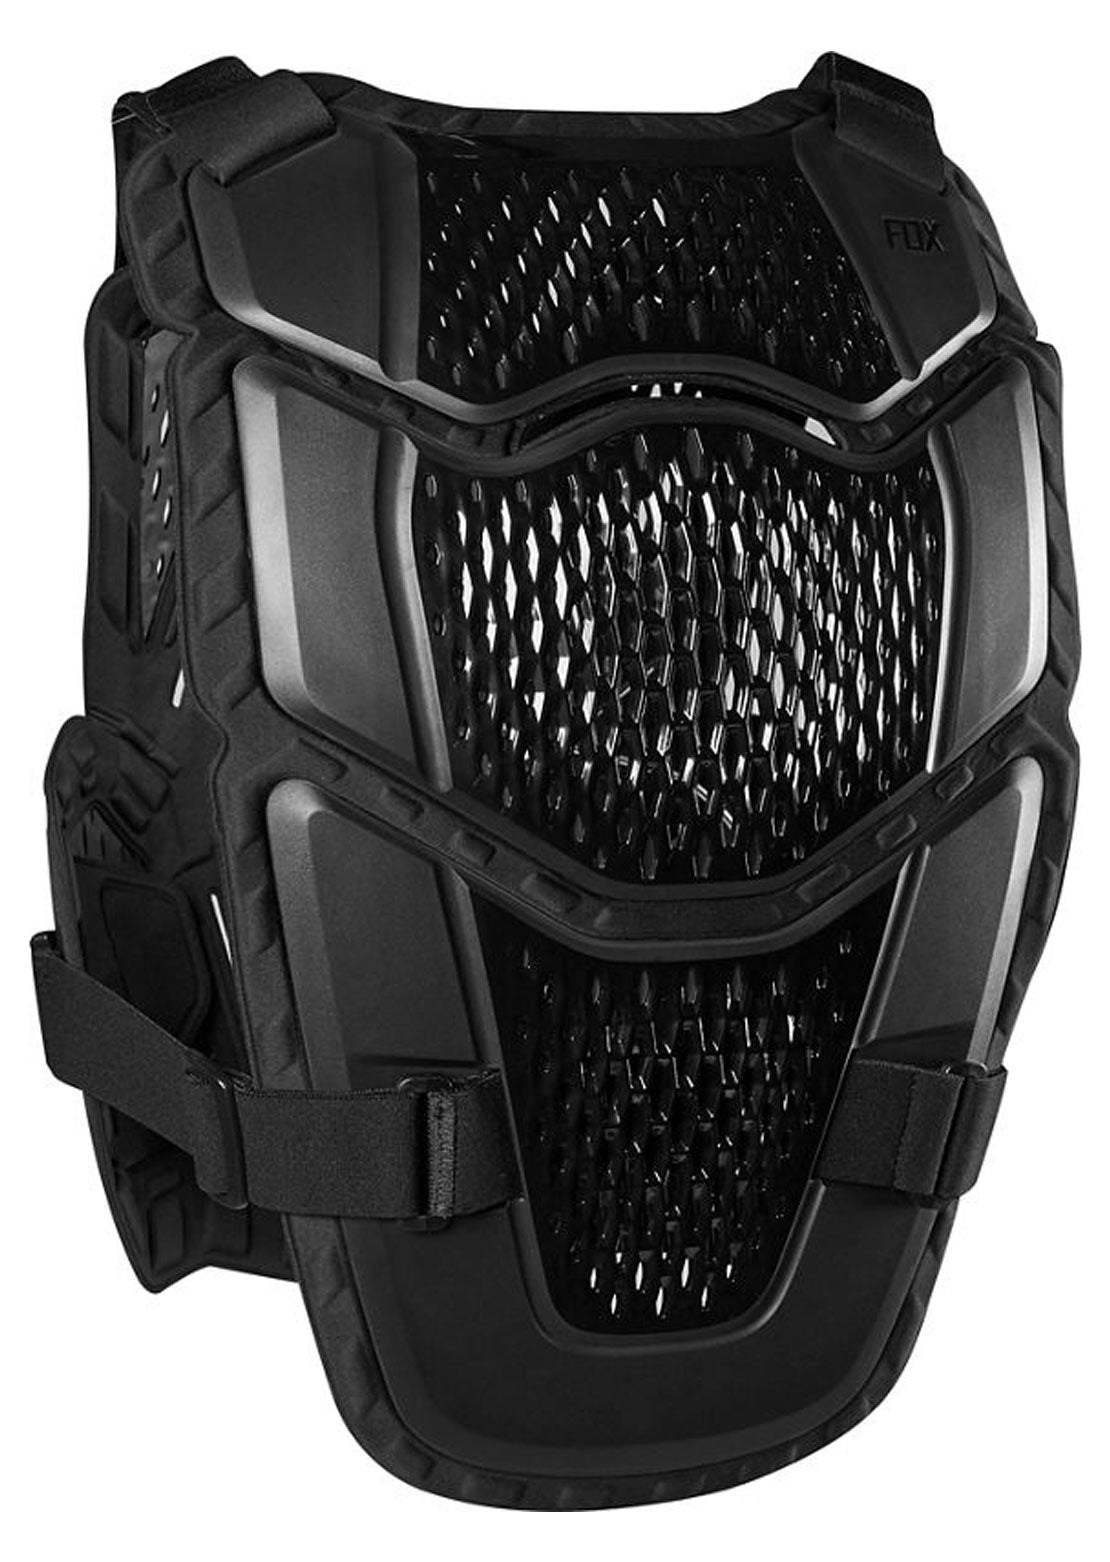 Fox Raceframe Roost Chest Guard Black